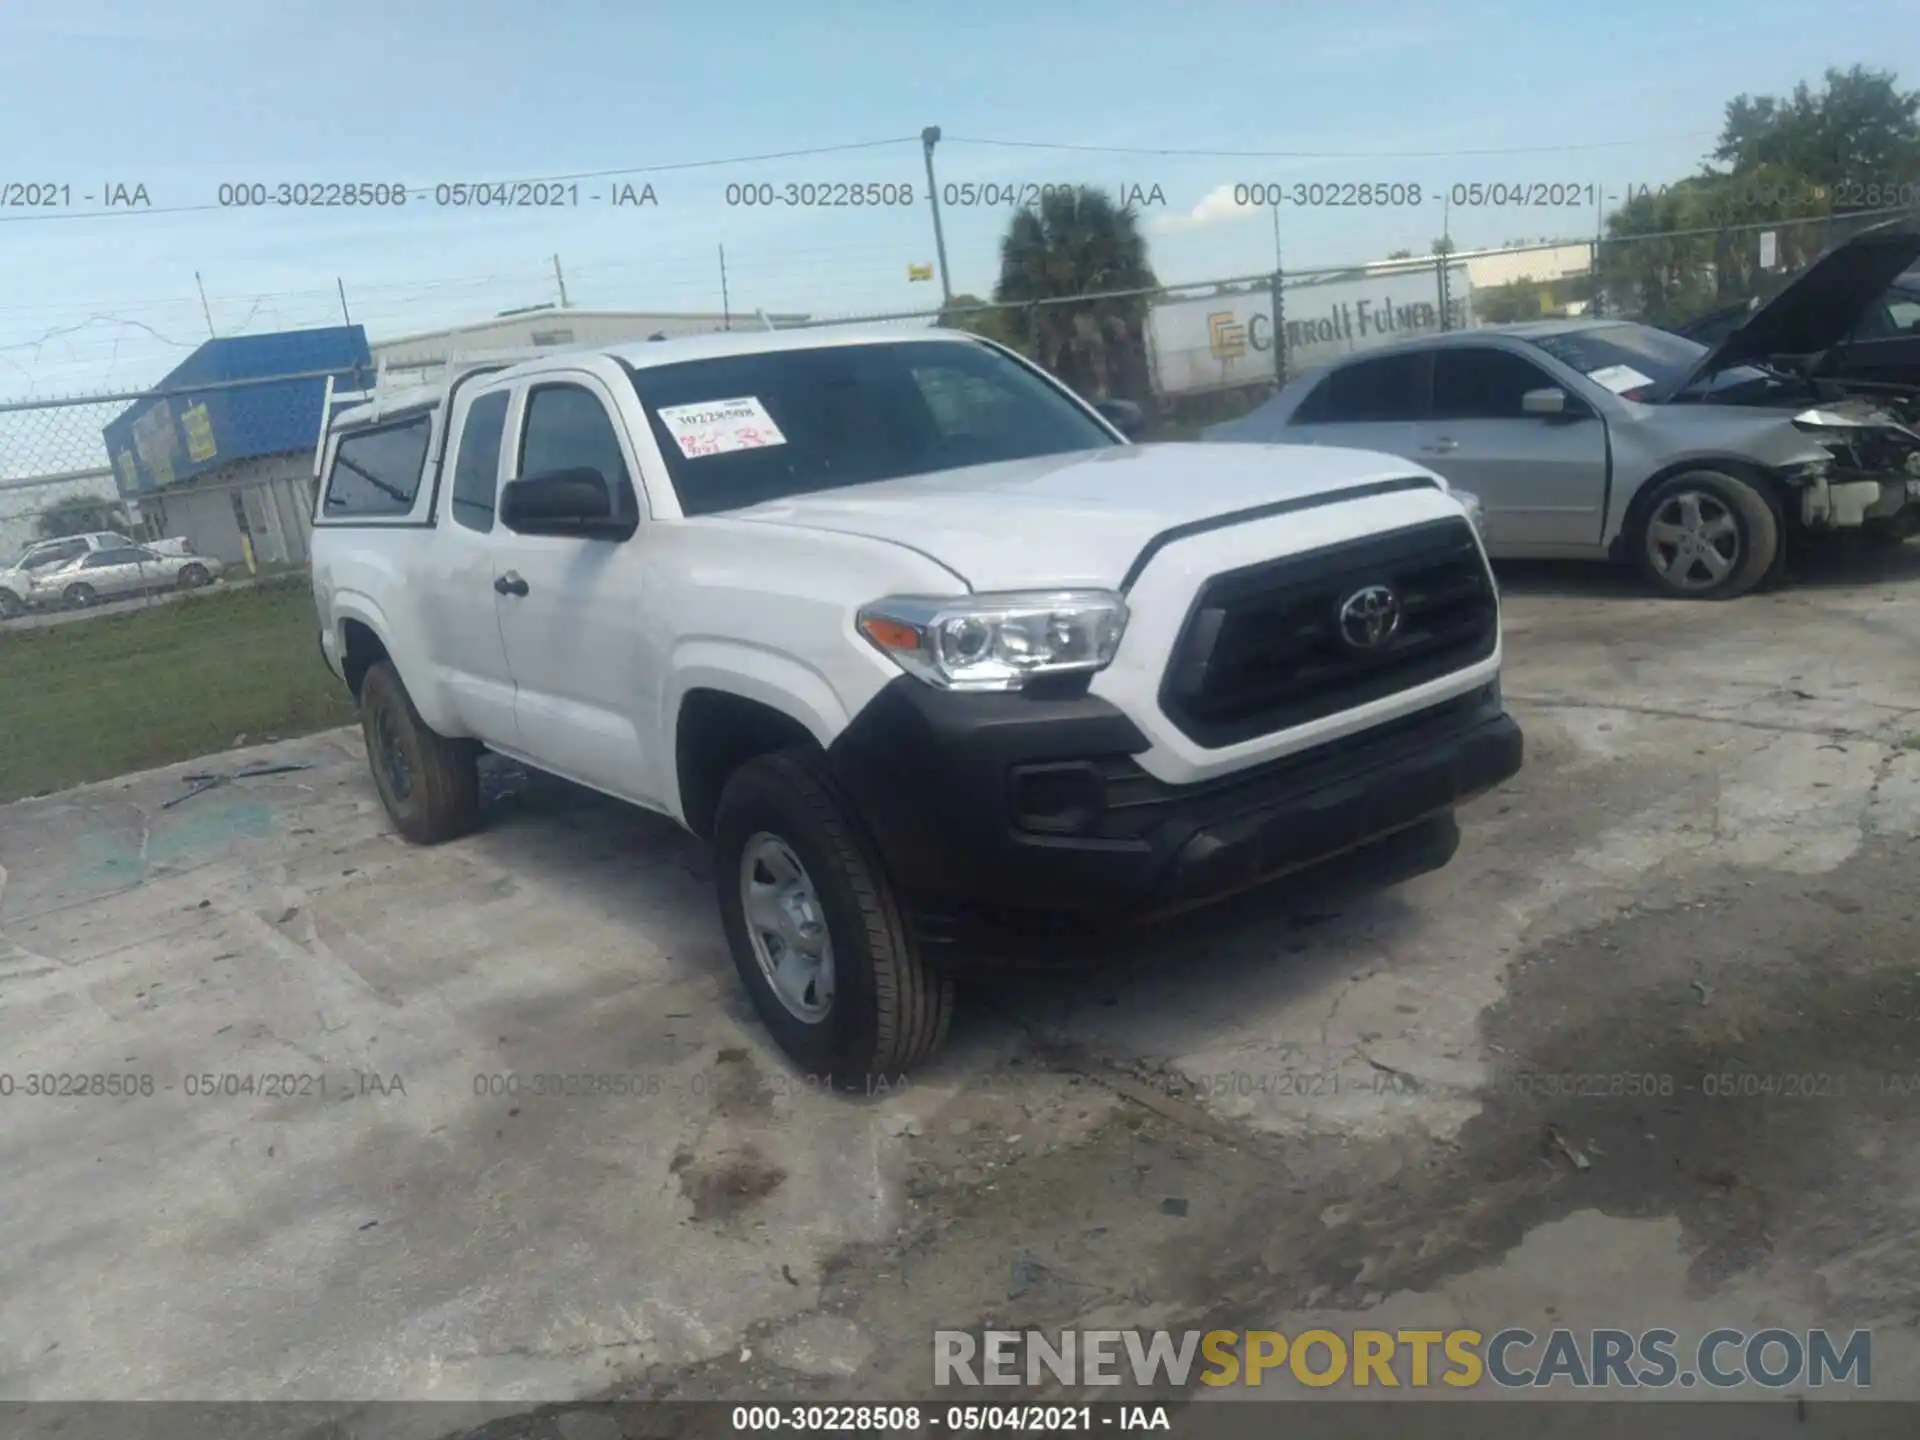 1 Photograph of a damaged car 5TFRX5GN7LX180266 TOYOTA TACOMA 2WD 2020